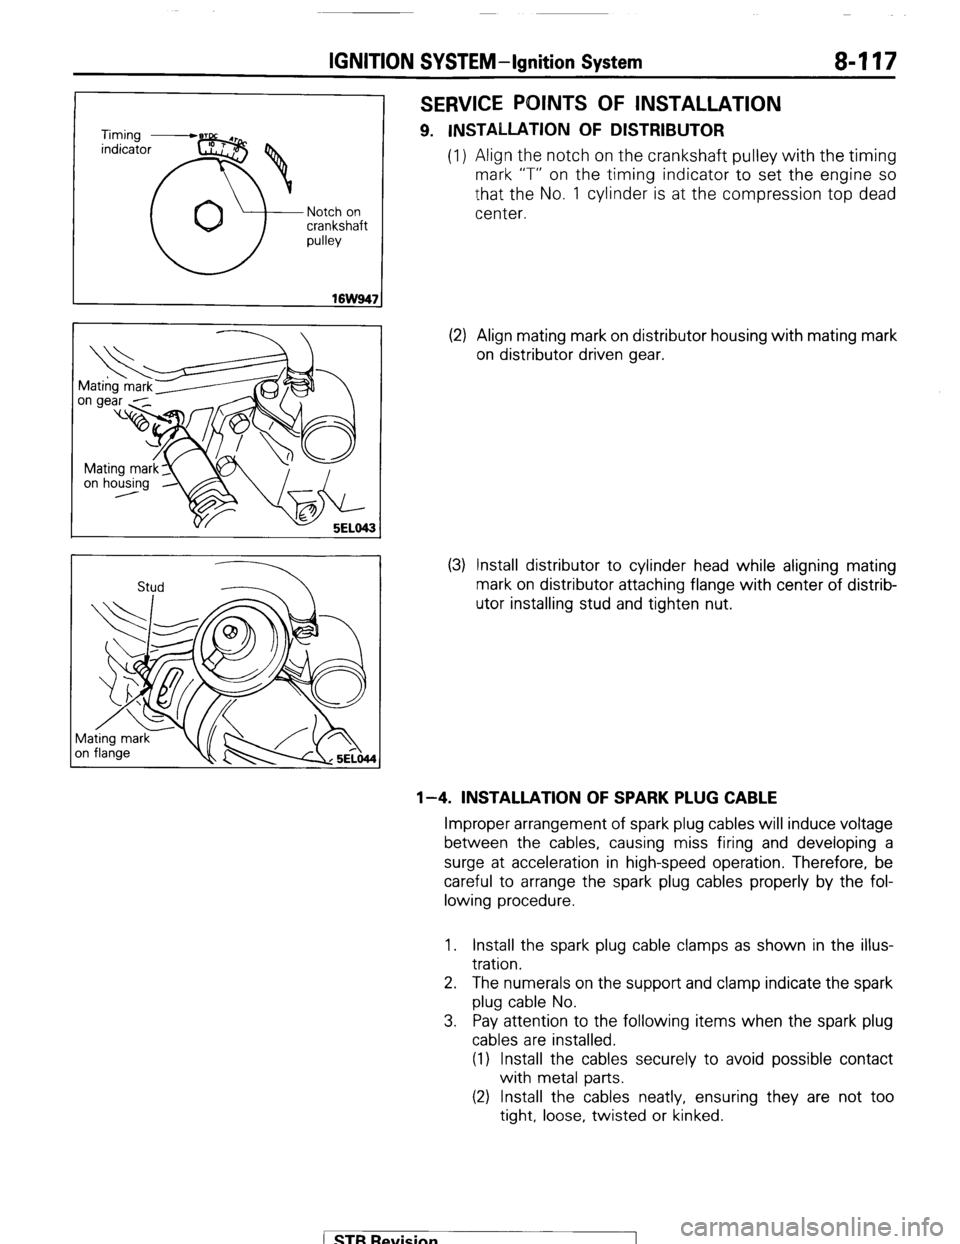 MITSUBISHI MONTERO 1987 1.G Workshop Manual IGNITION SYSTEM-Ignition System 8417 
Notch on 
crankshaft 
pulley 
Stud 2 
SERVICE POINTS OF INSTALLATION 
9. INSTALLATION OF DISTRIBUTOR 
(1) Align the notch on the crankshaft pulley with the timing